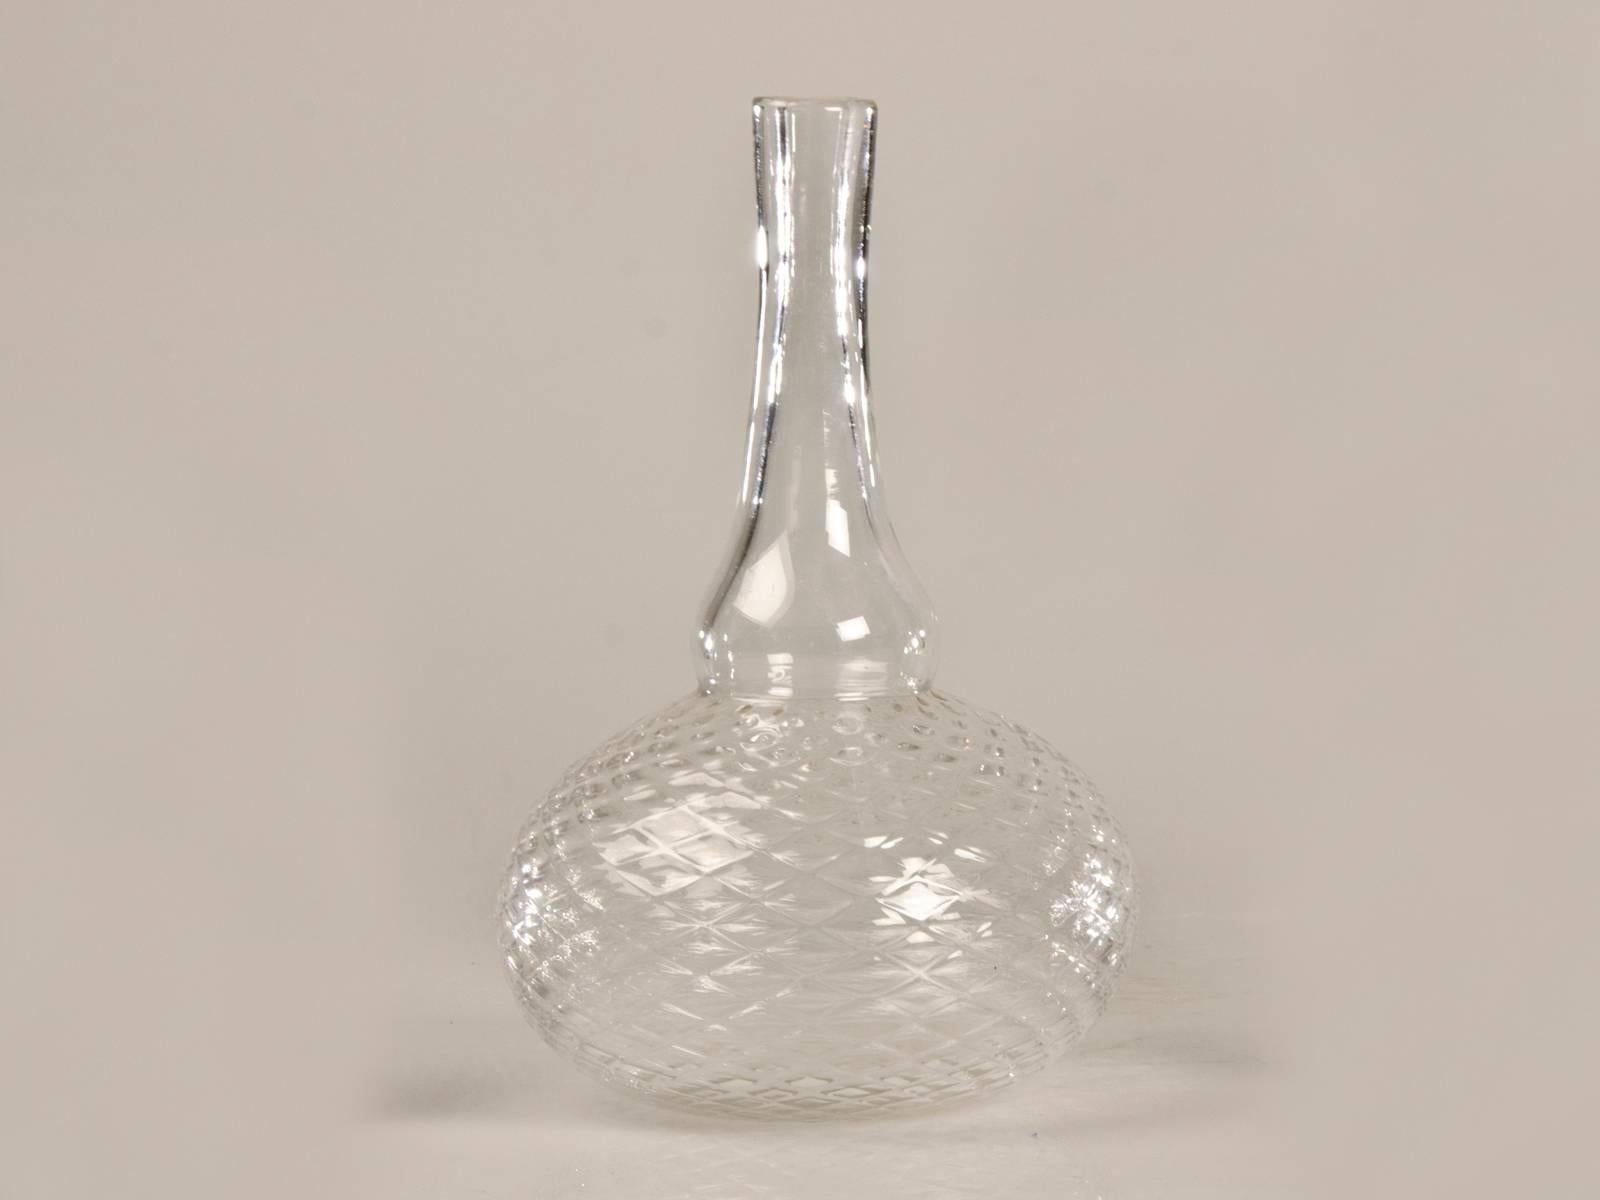 Hand-Crafted Antique English Regency Period Moulded Glass Wine Decanter, circa 1820